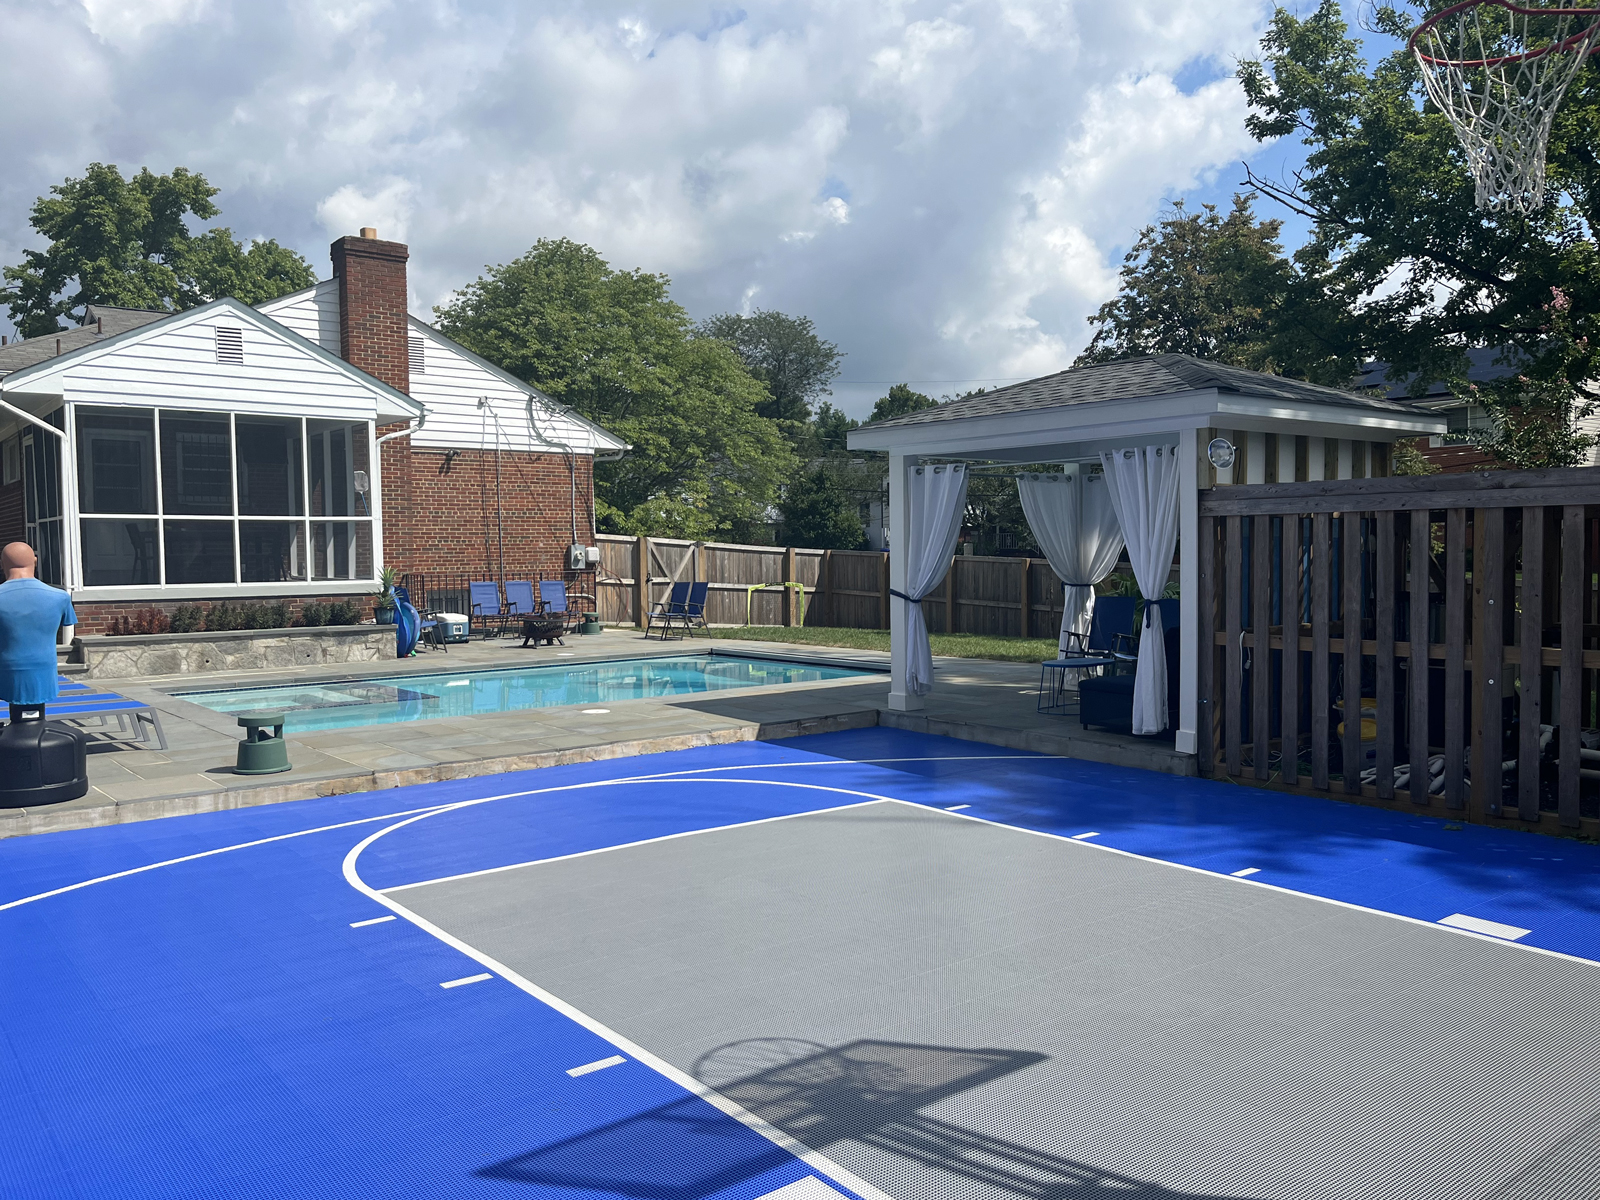 Blue and gray basketball half court in backyard with pool